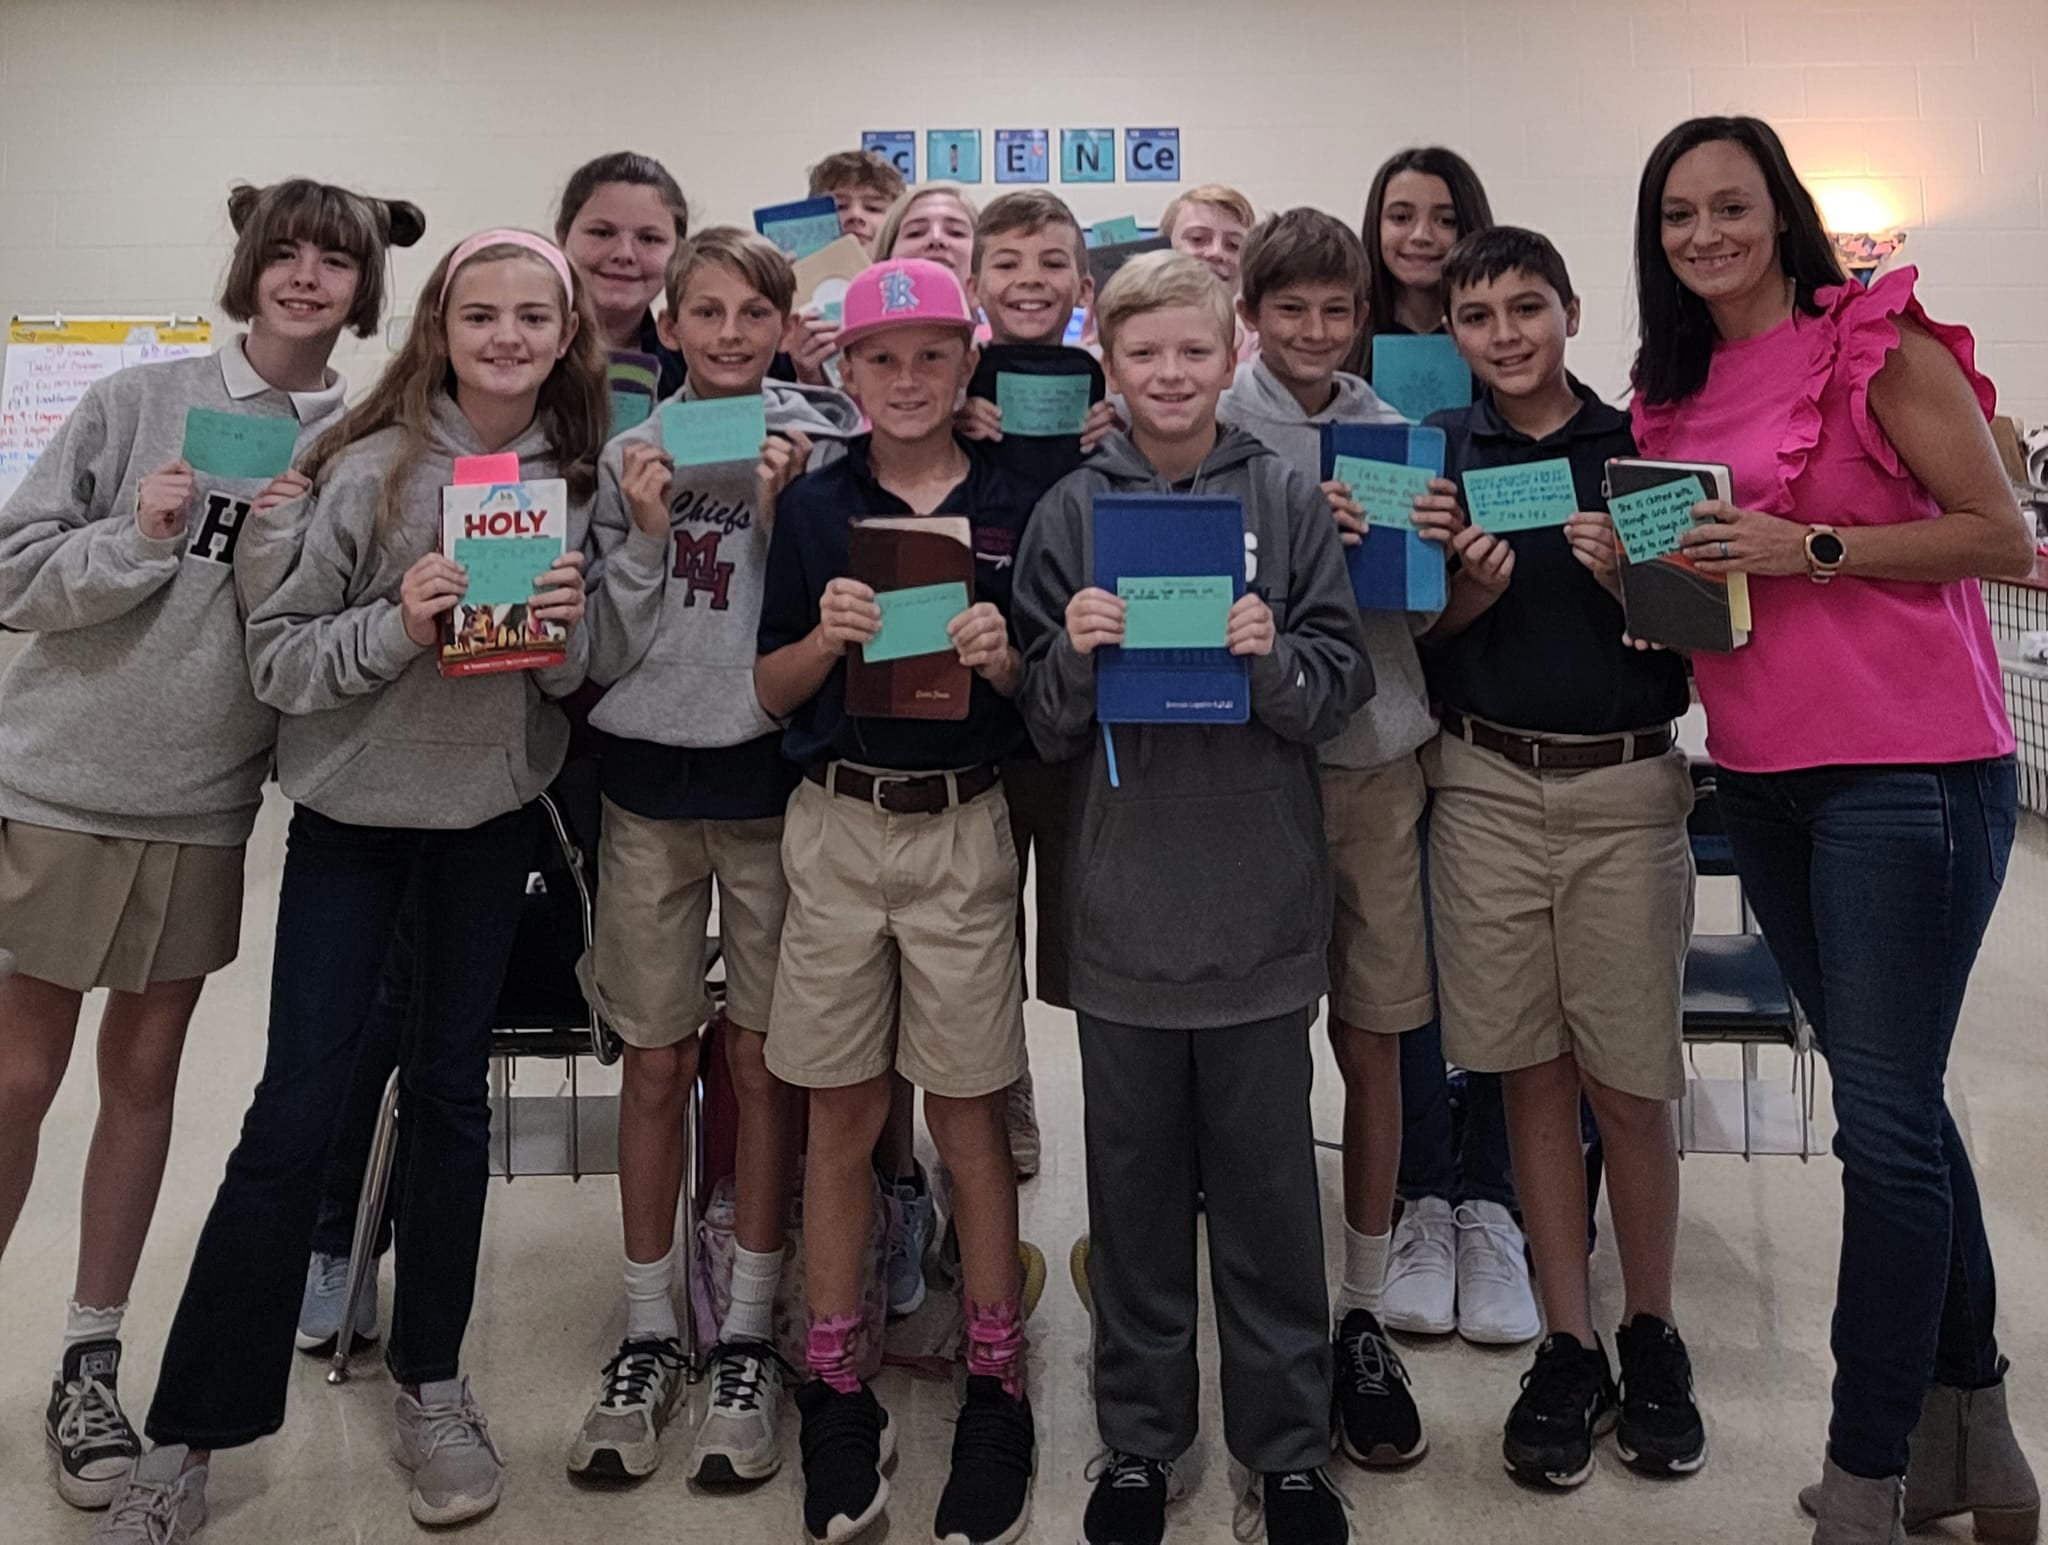 Bring Your Bible to School Day | FLI Insider